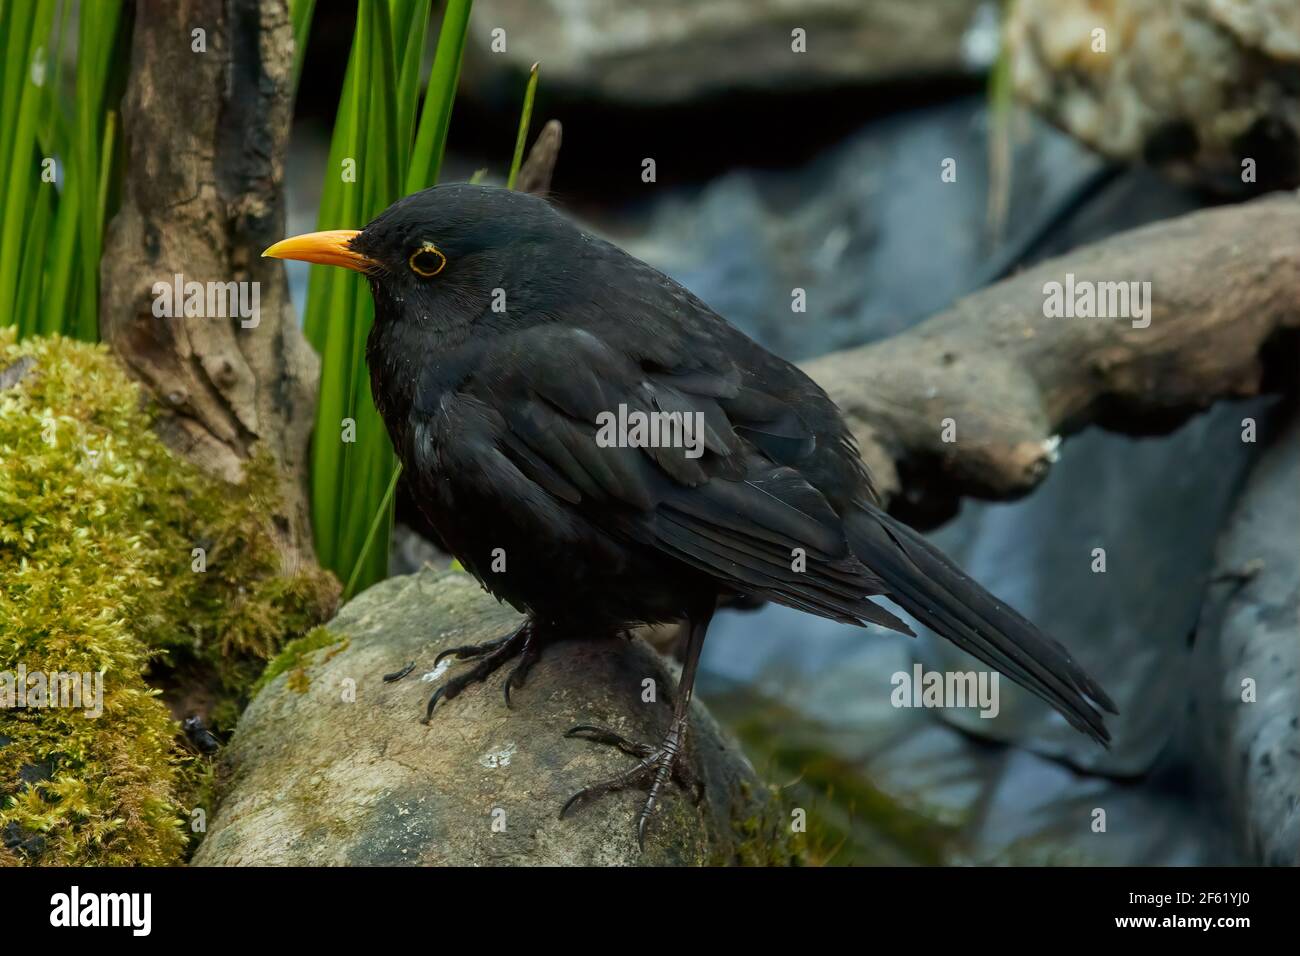 The common blackbird (Turdus merula) is a species of true thrush. It is also called the Eurasian blackbird (especially in North America, to distinguis Stock Photo